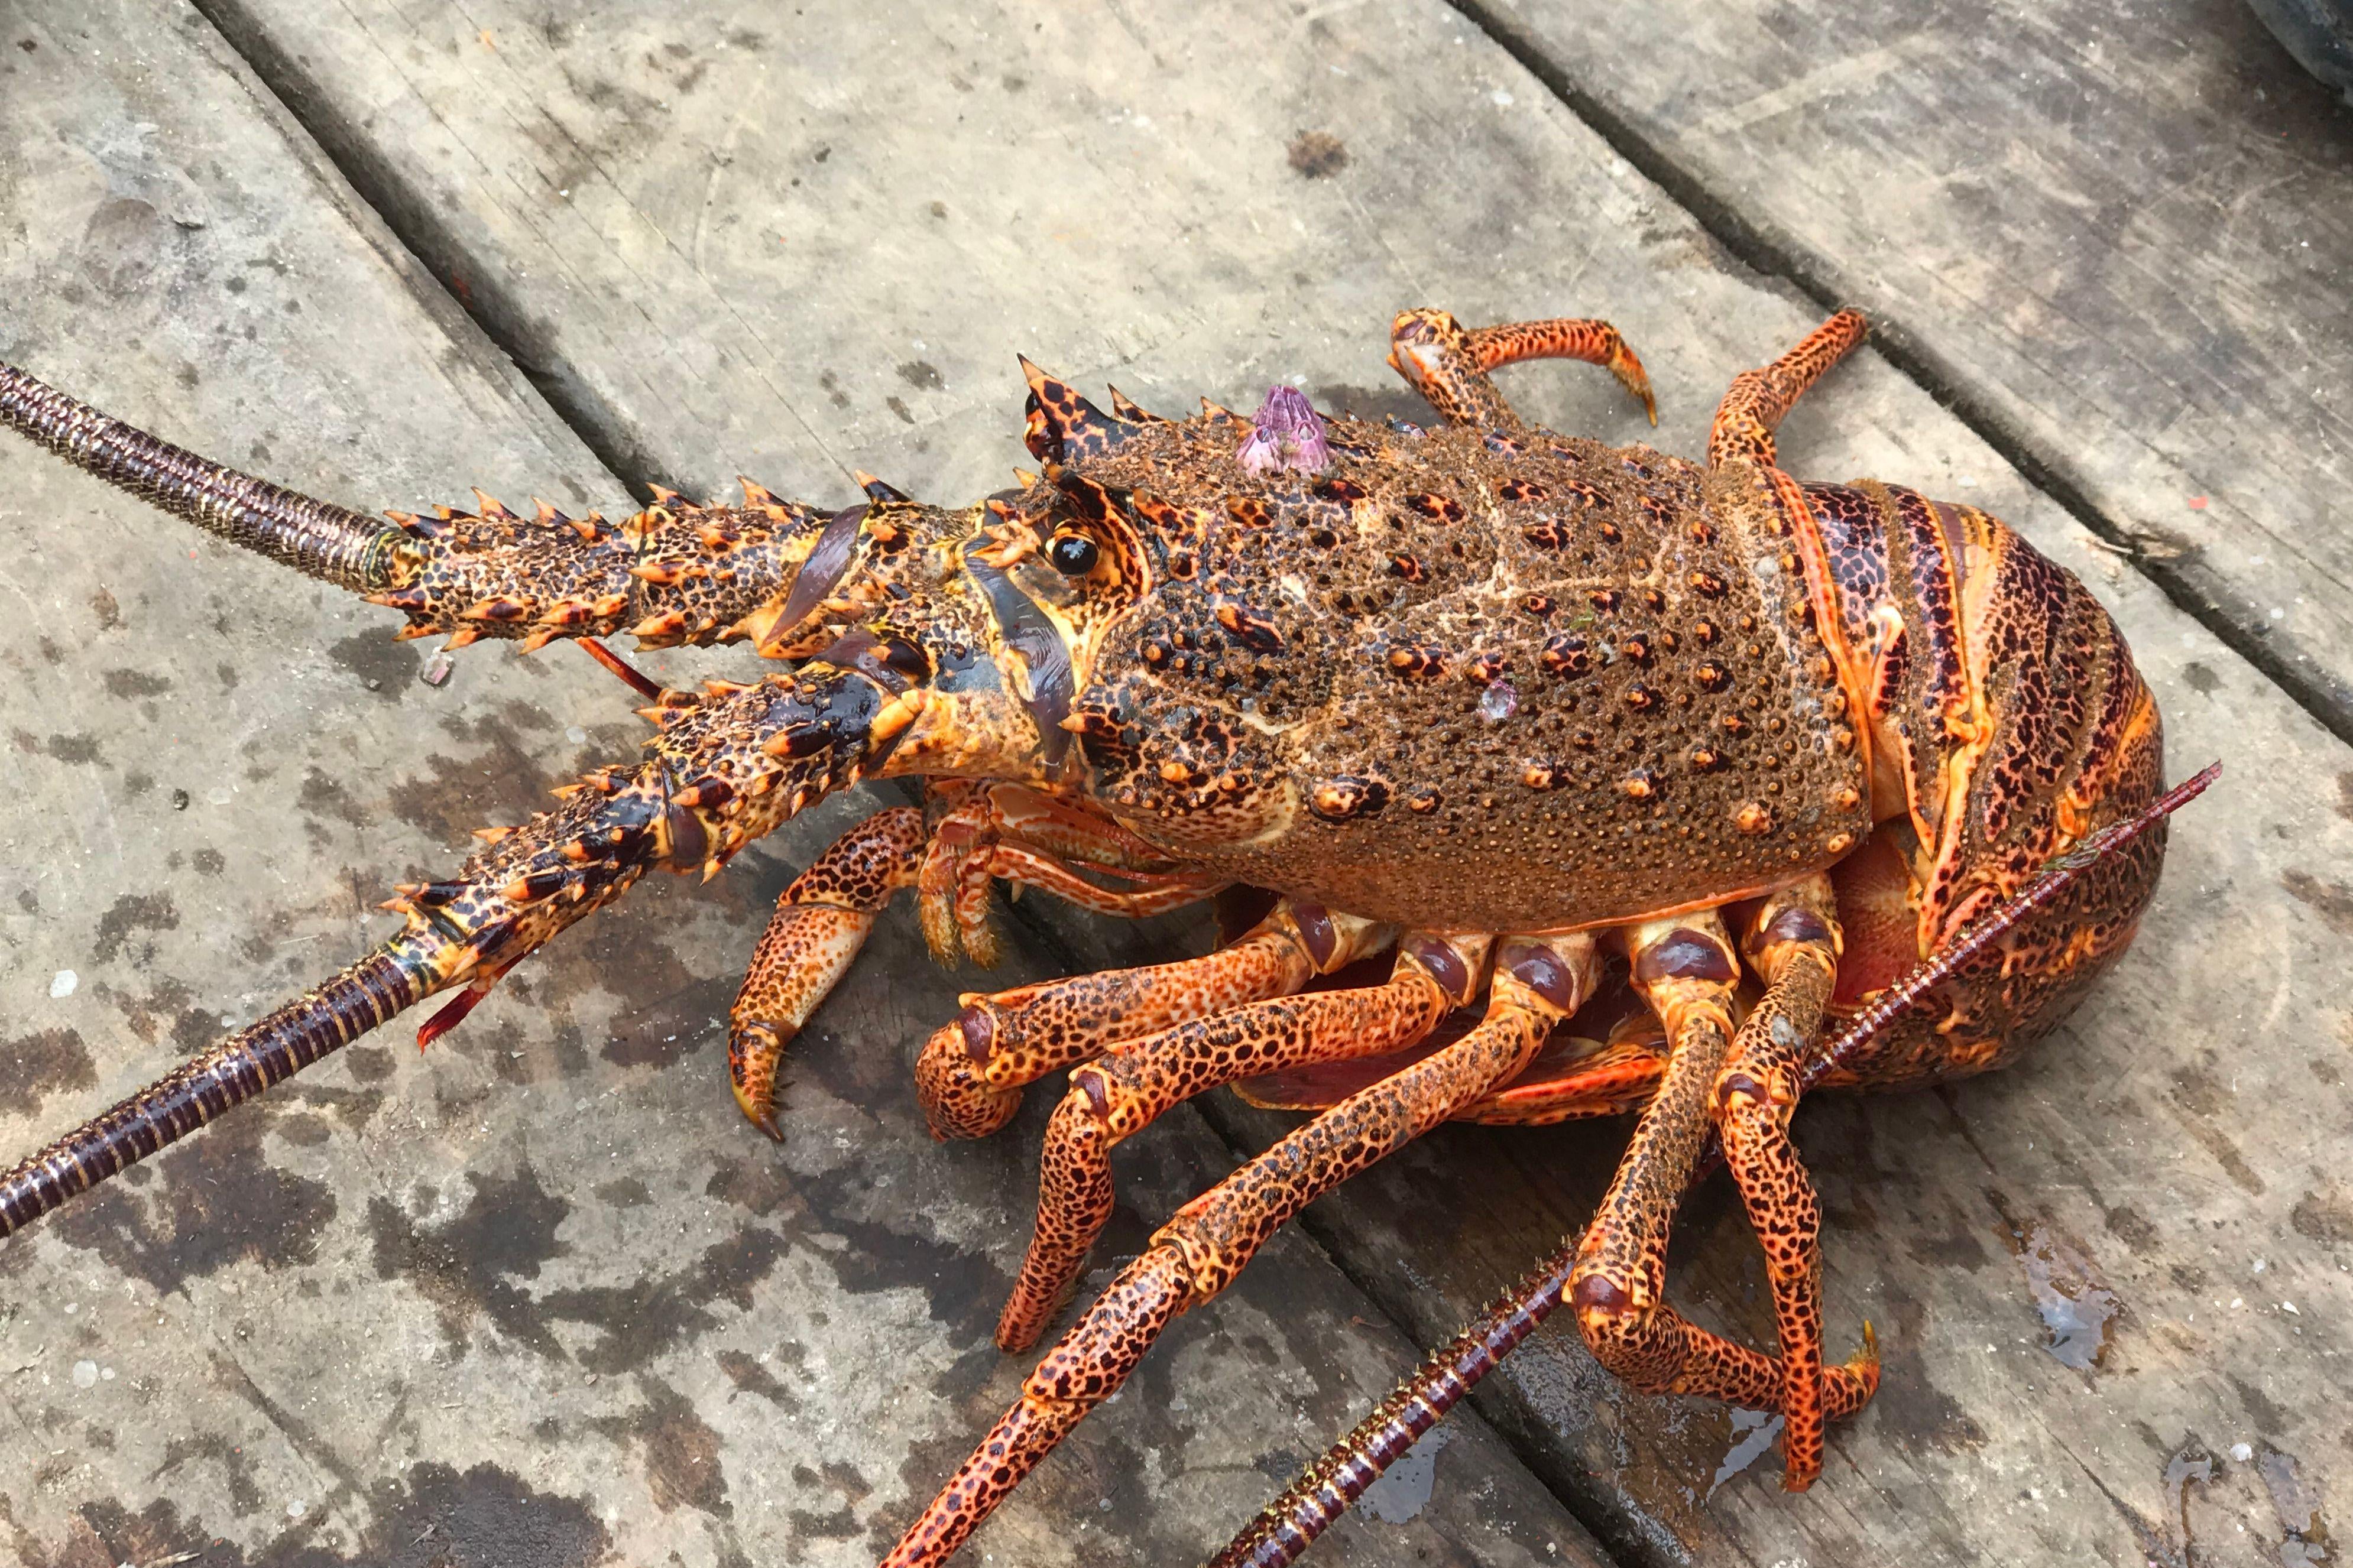 Picture of a lobster on a boat off Robinson Crusoe Island, in the Pacific Juan Fernandez Islands, off the coast of Chile, taken on January 30, 2019. - This divers' paradise, some 700 km west of the Chilean coast and with a population of about a thousand inhabitants, has just taken a fundamental step in its conservation - by 2020 it aspires to become free of single-use plastics. (Photo by Ana FERNANDEZ / AFP)        (Photo credit should read ANA FERNANDEZ/AFP/Getty Images)